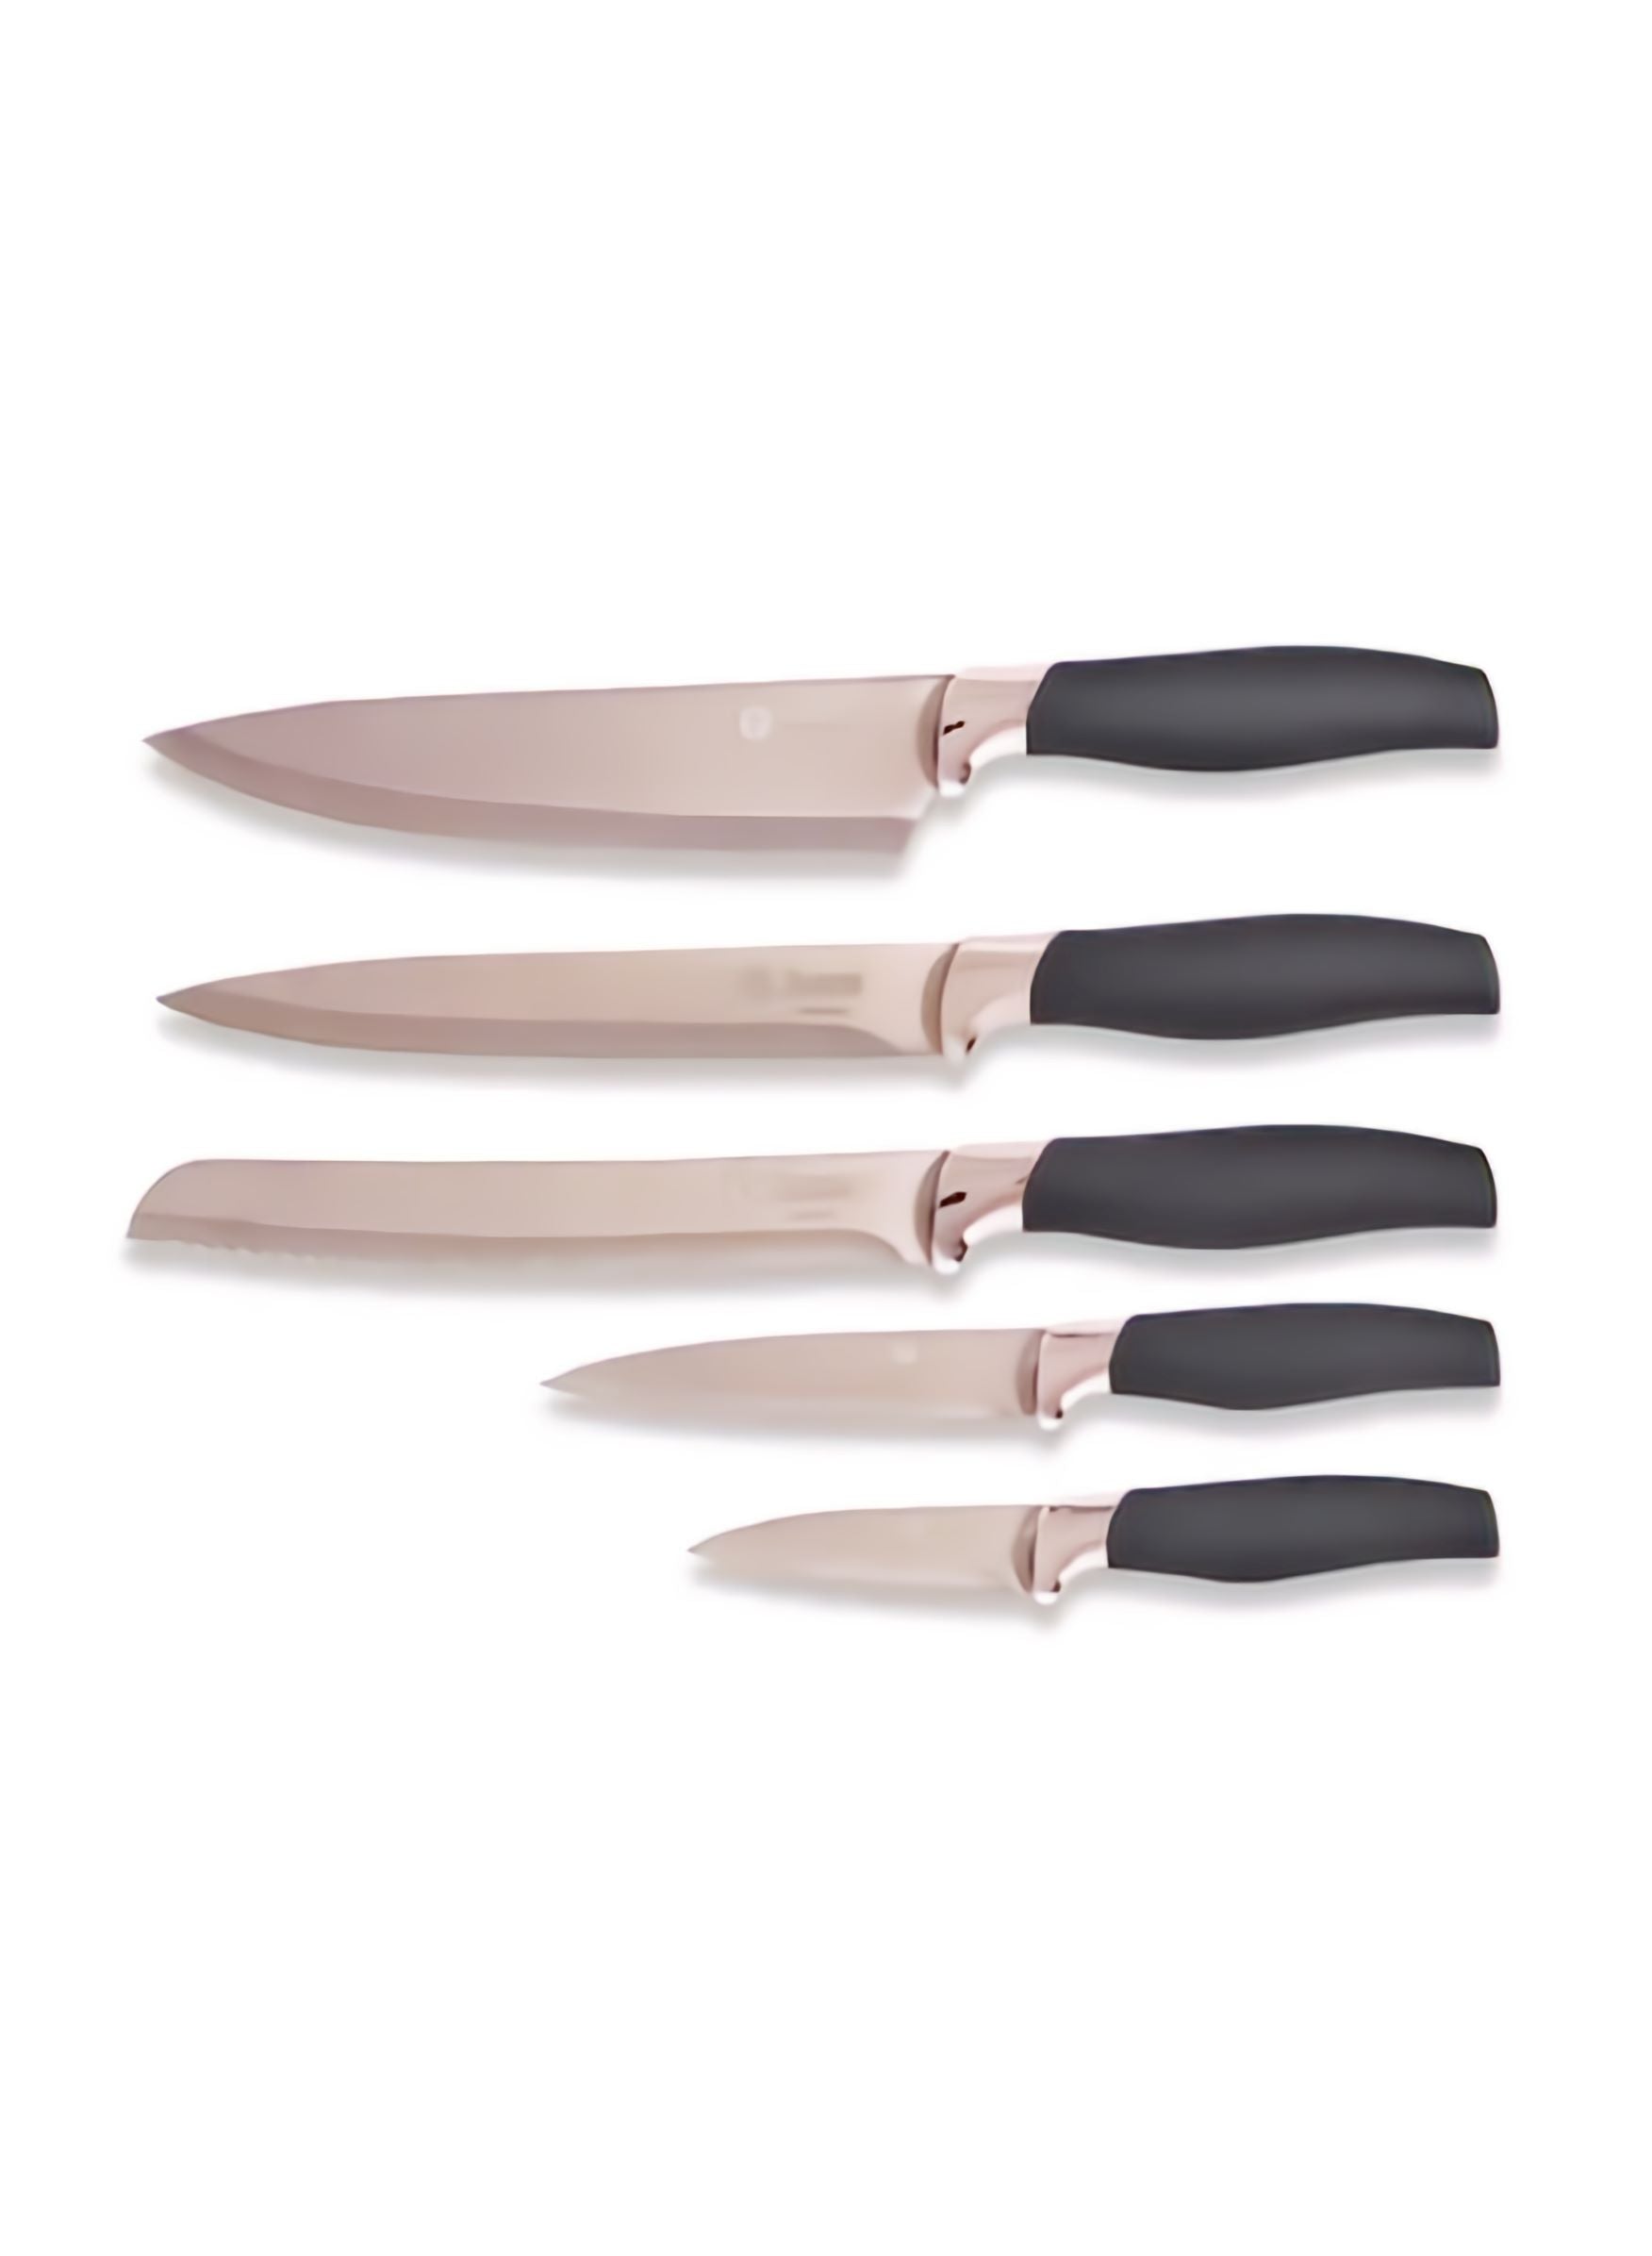 5-Pieces Aria Stainless Steel Knife Set Rose Gold/Black